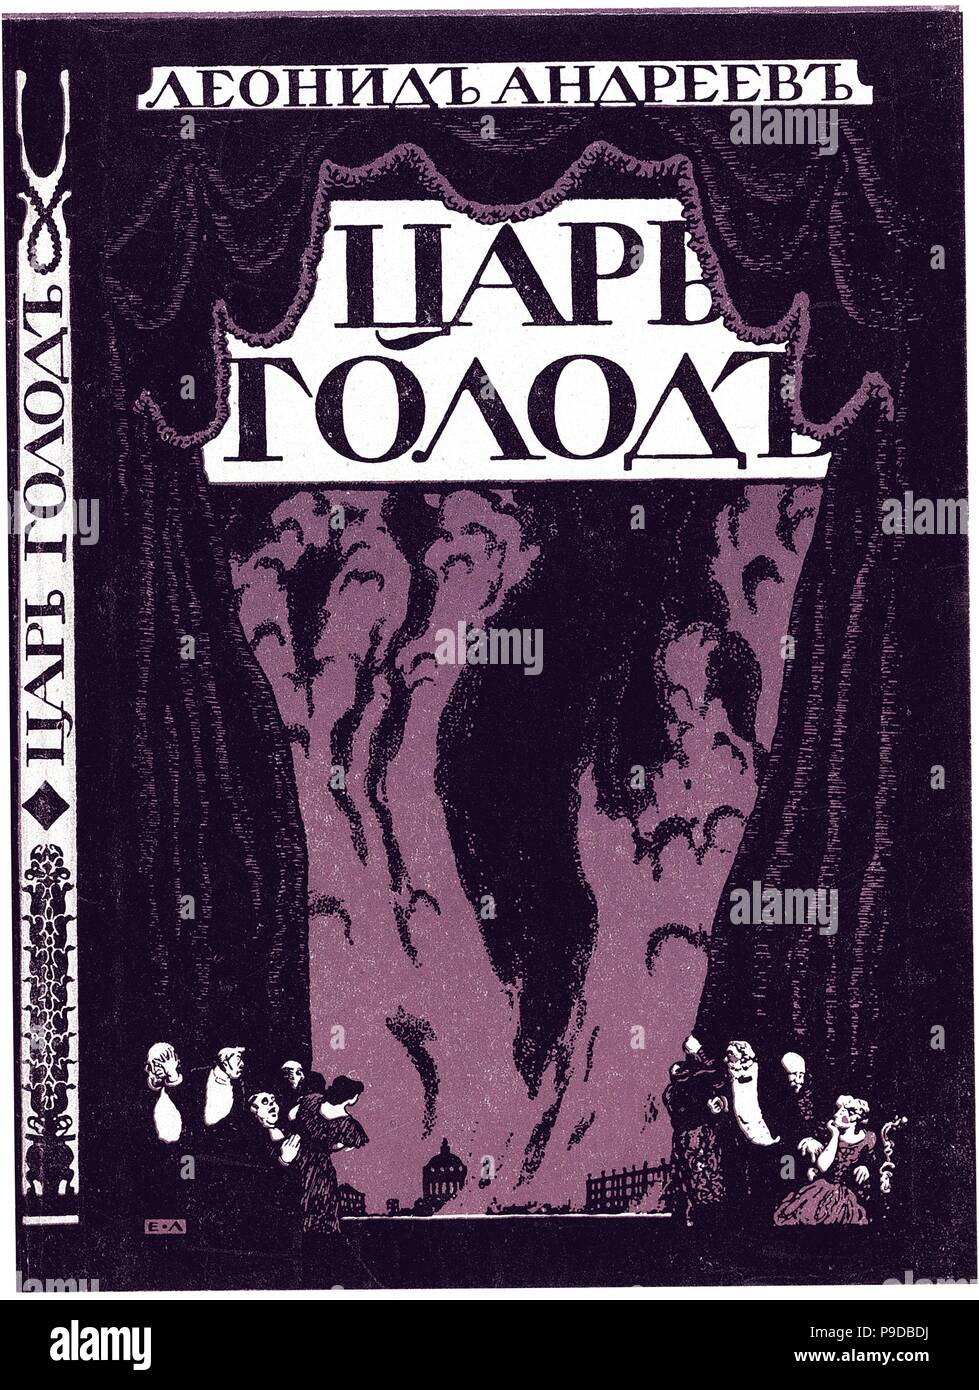 Title page of the book Tsar Hunger by Leonid Andreyev. Museum: State Russian Museum, St. Petersburg. Stock Photo